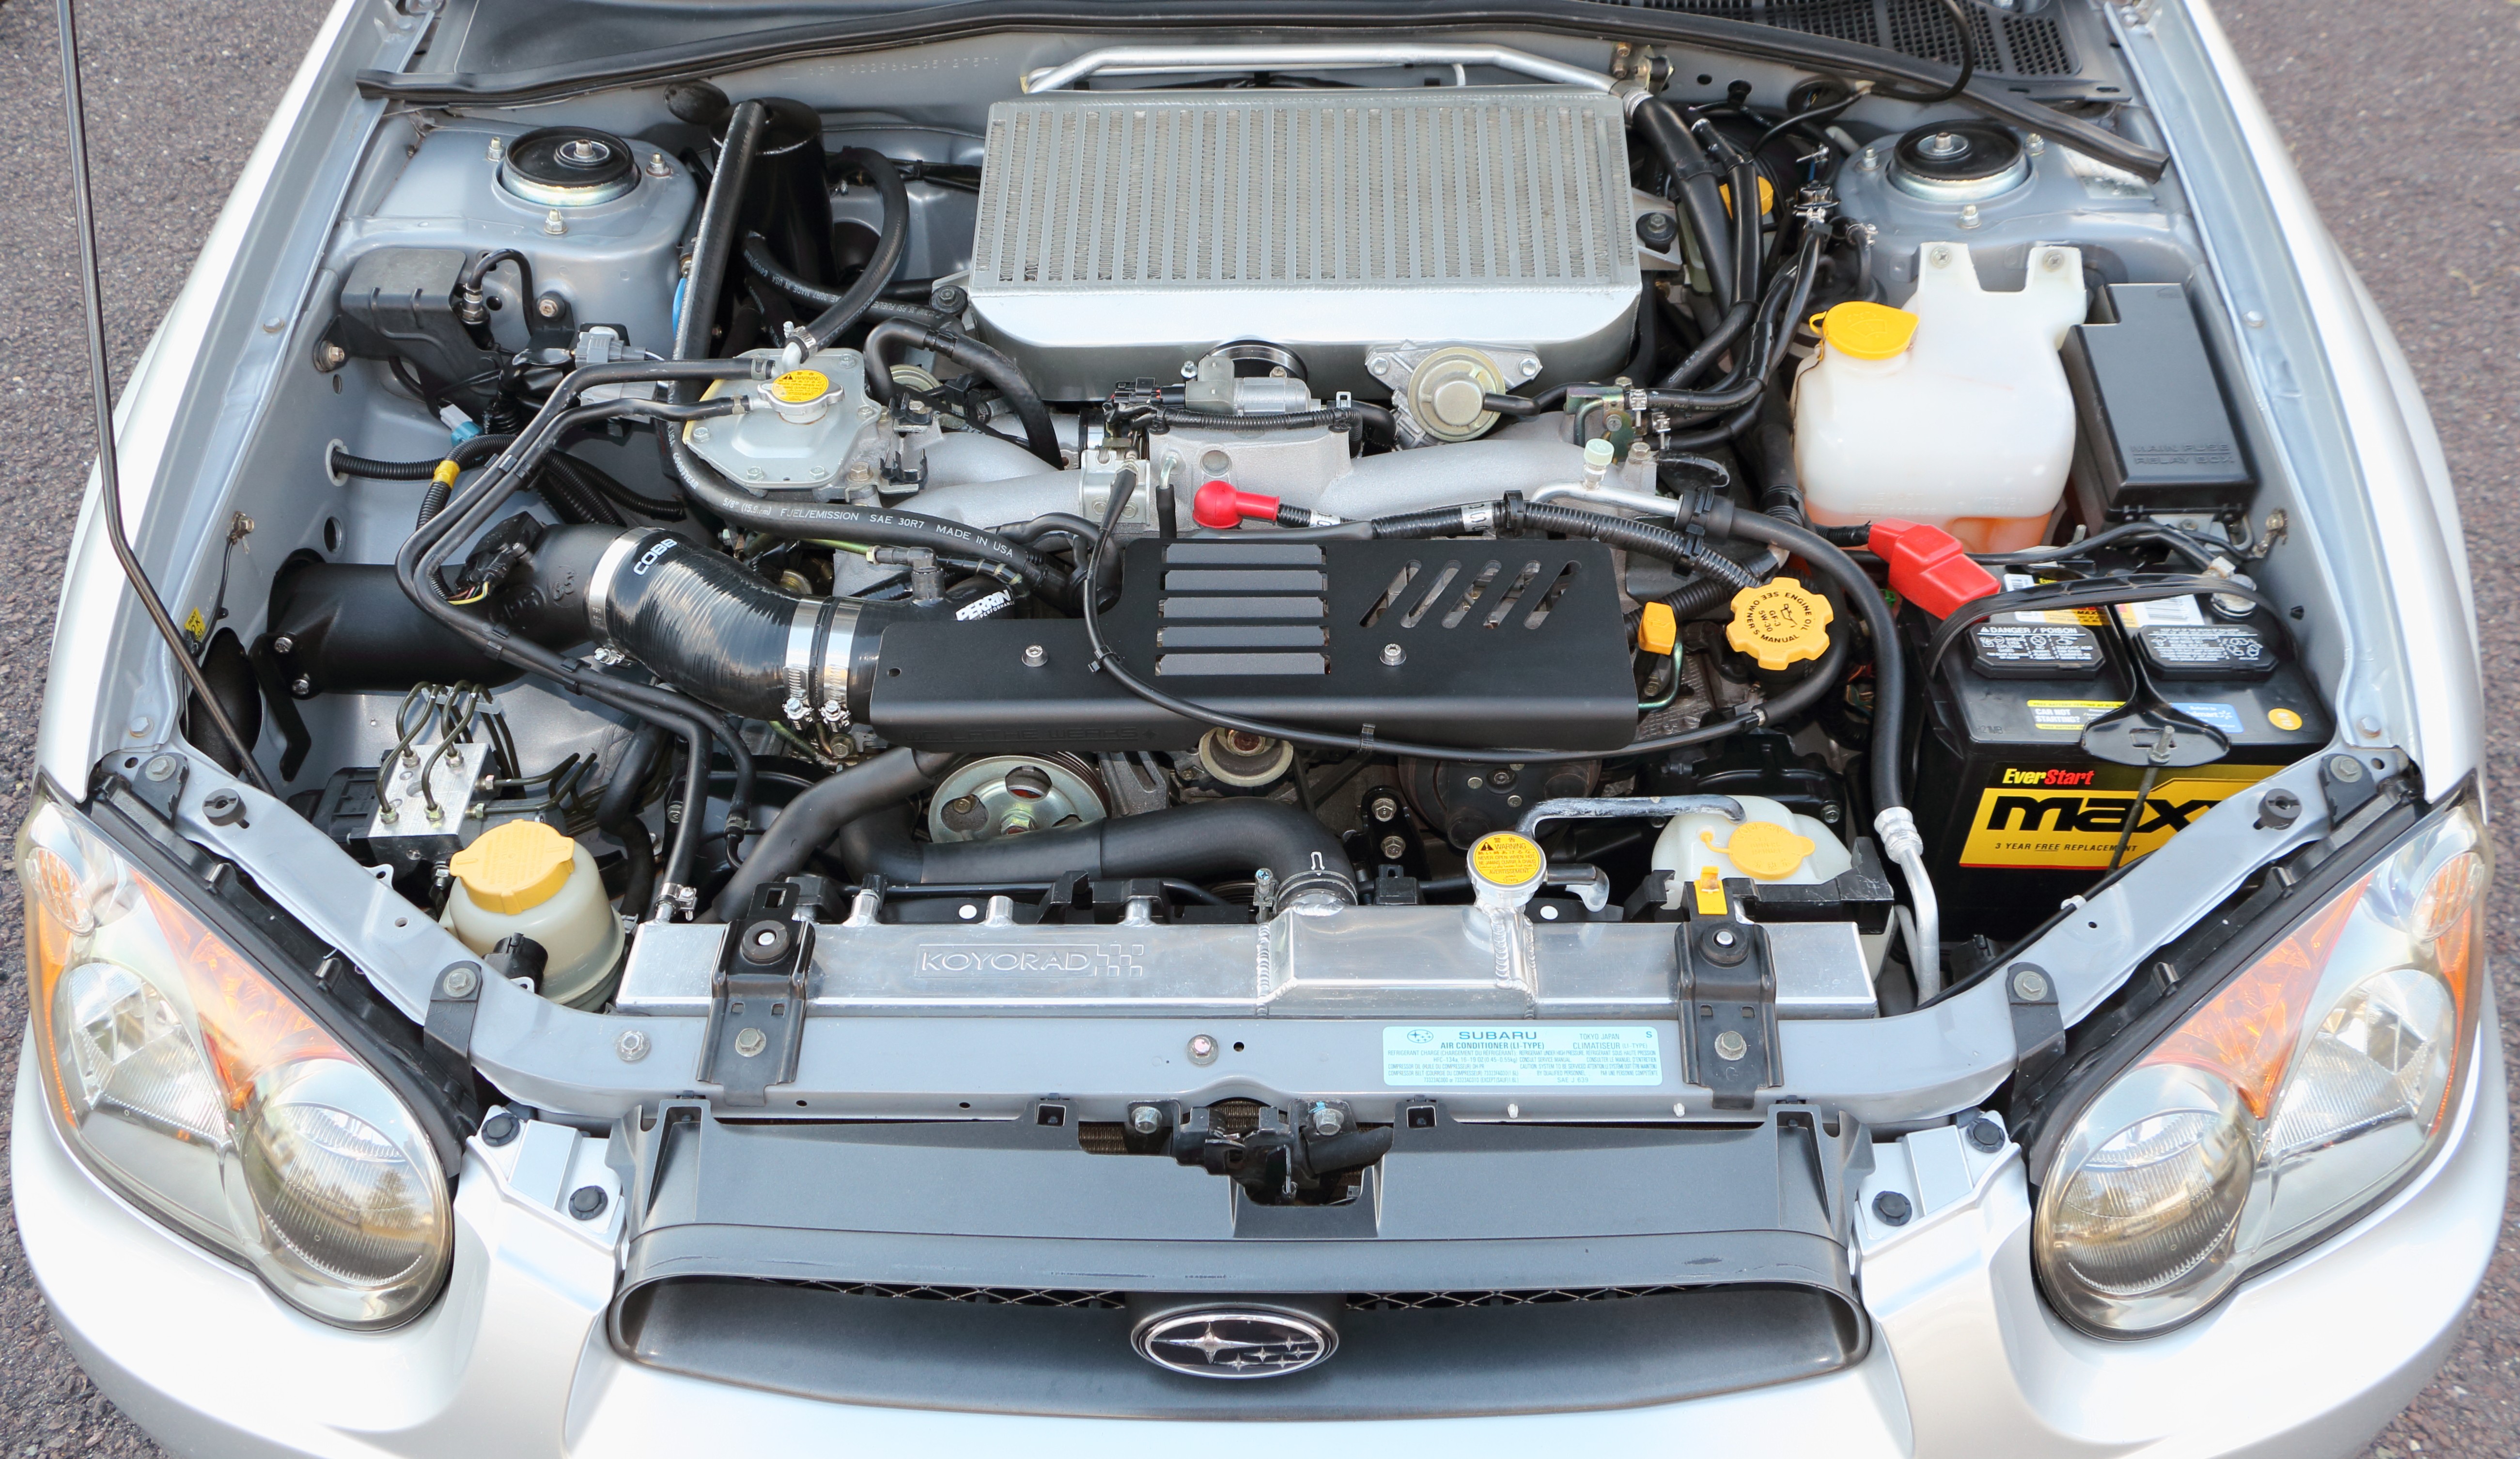 Wrx Engine Bay Diagram How to Safely Clean An Engine Bay Of Wrx Eng...